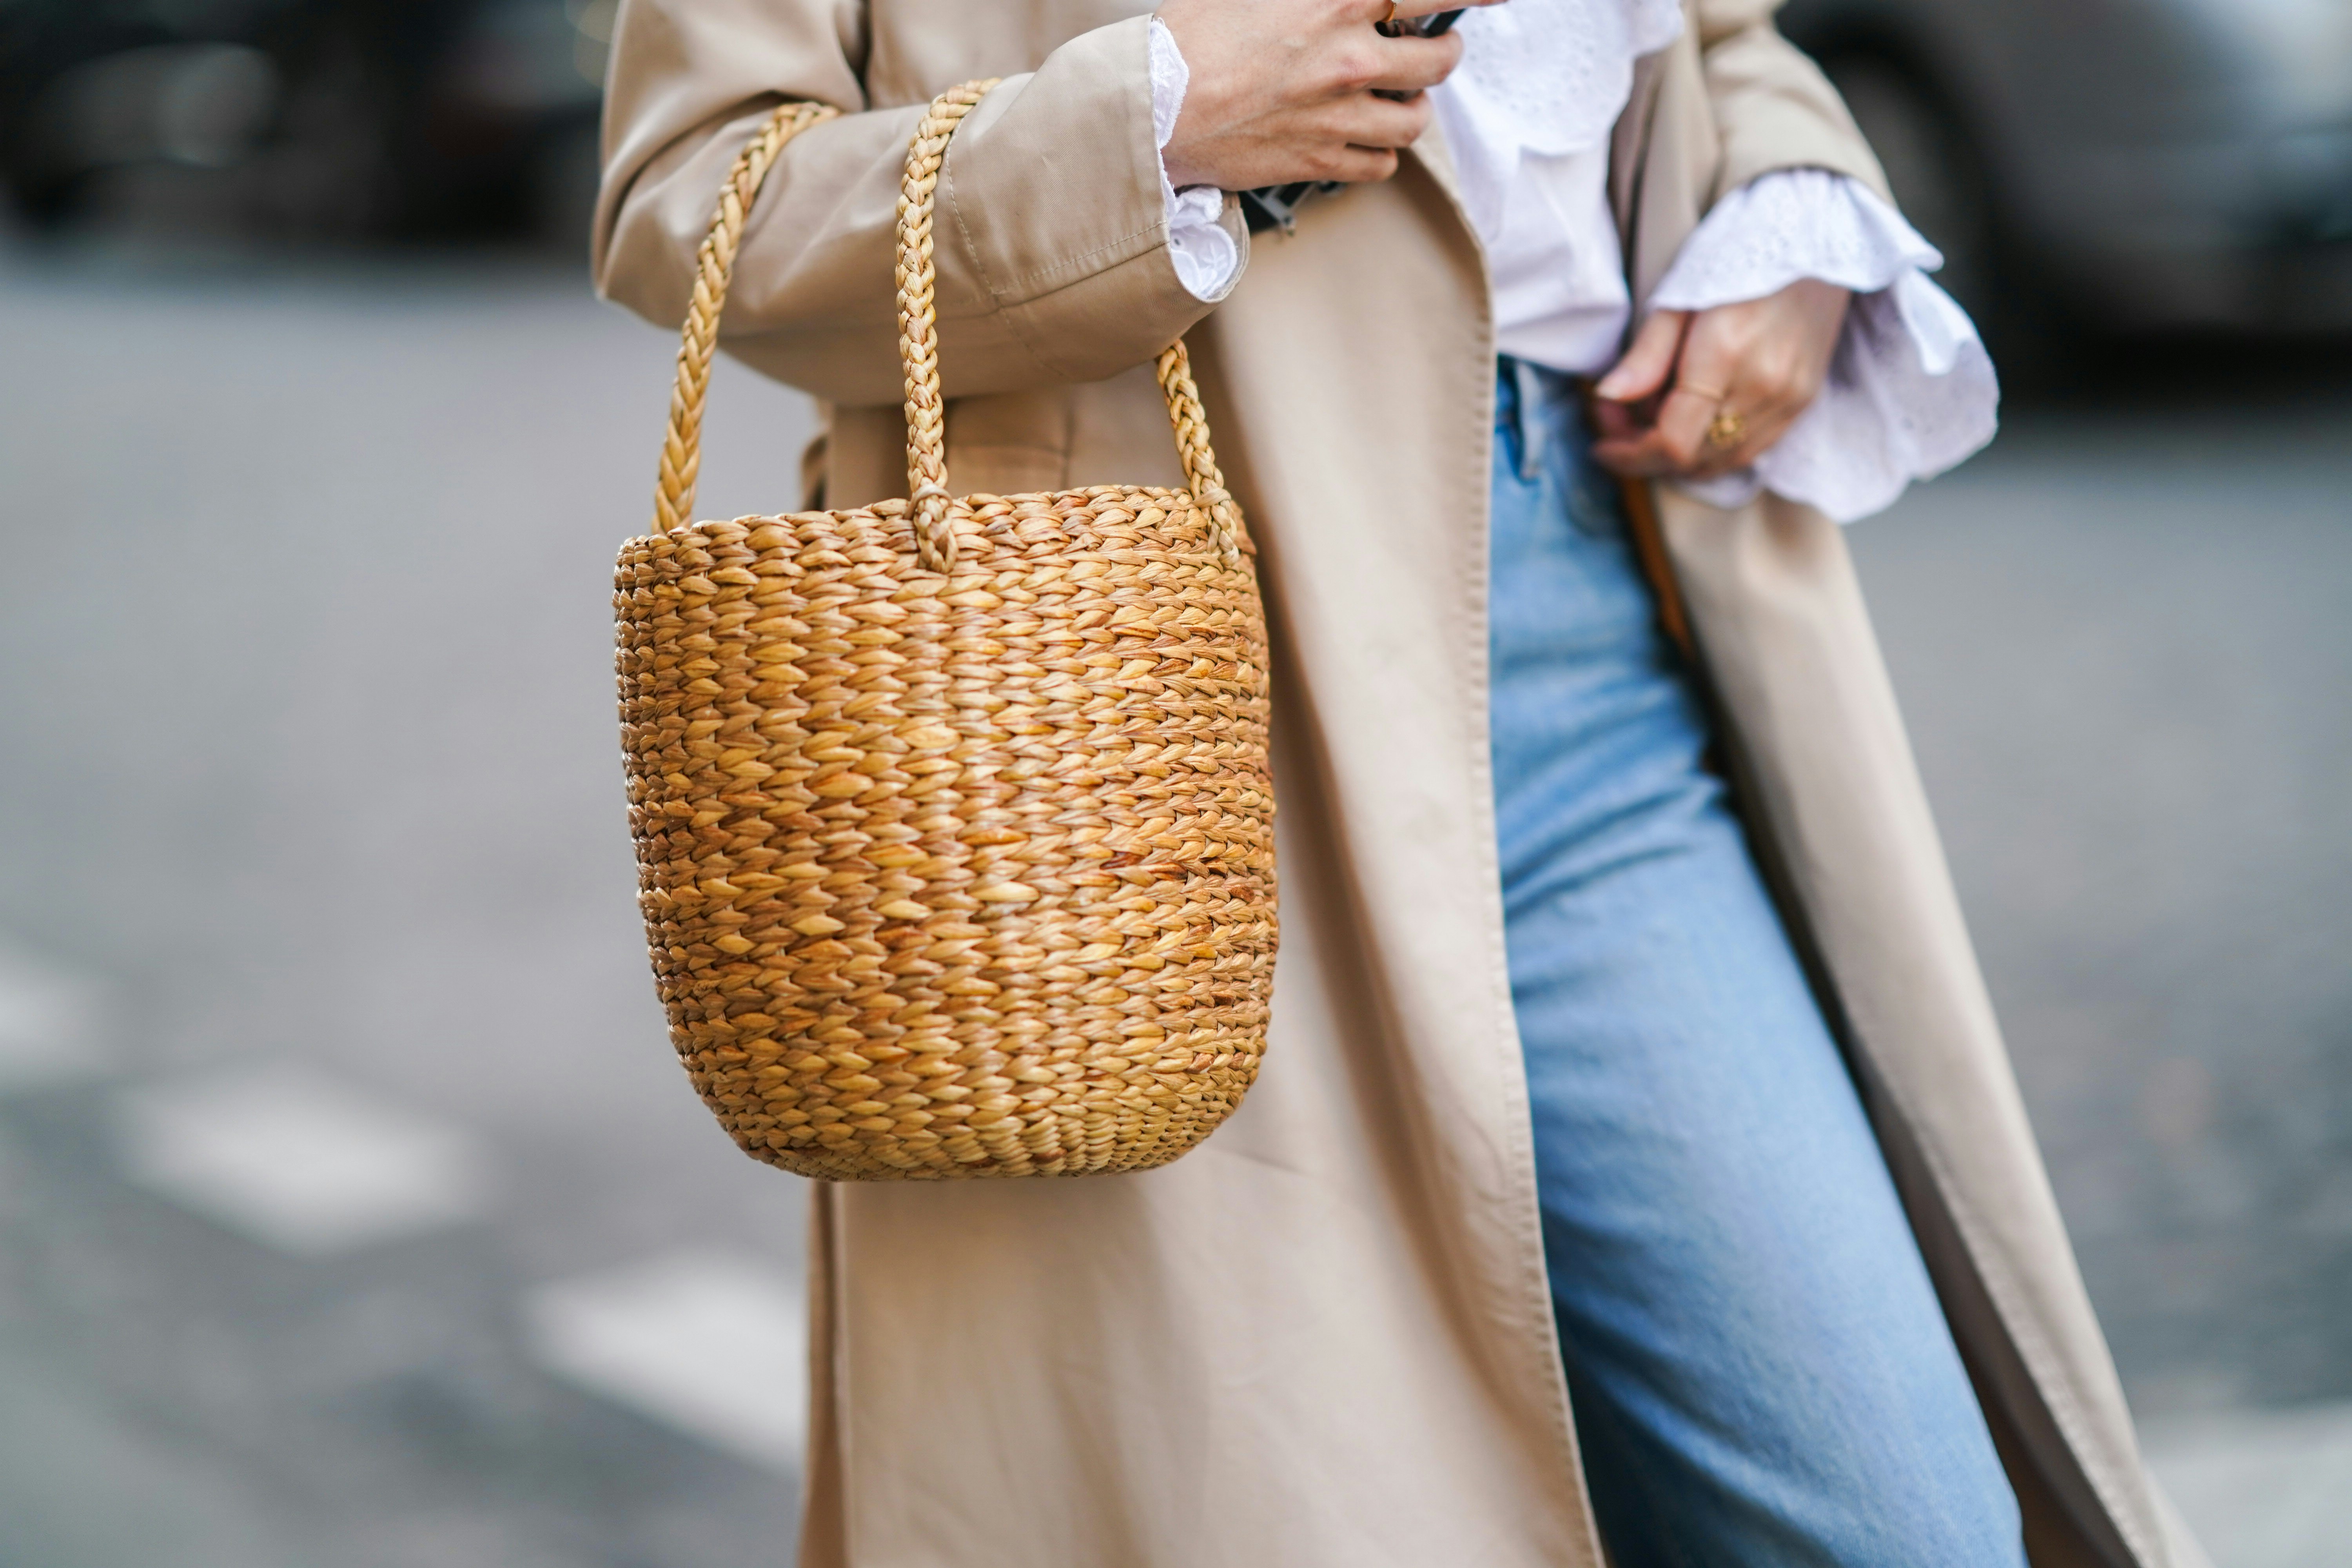 5 FUN WAYS TO DRESS UP A STRAW BAG FOR SUMMER